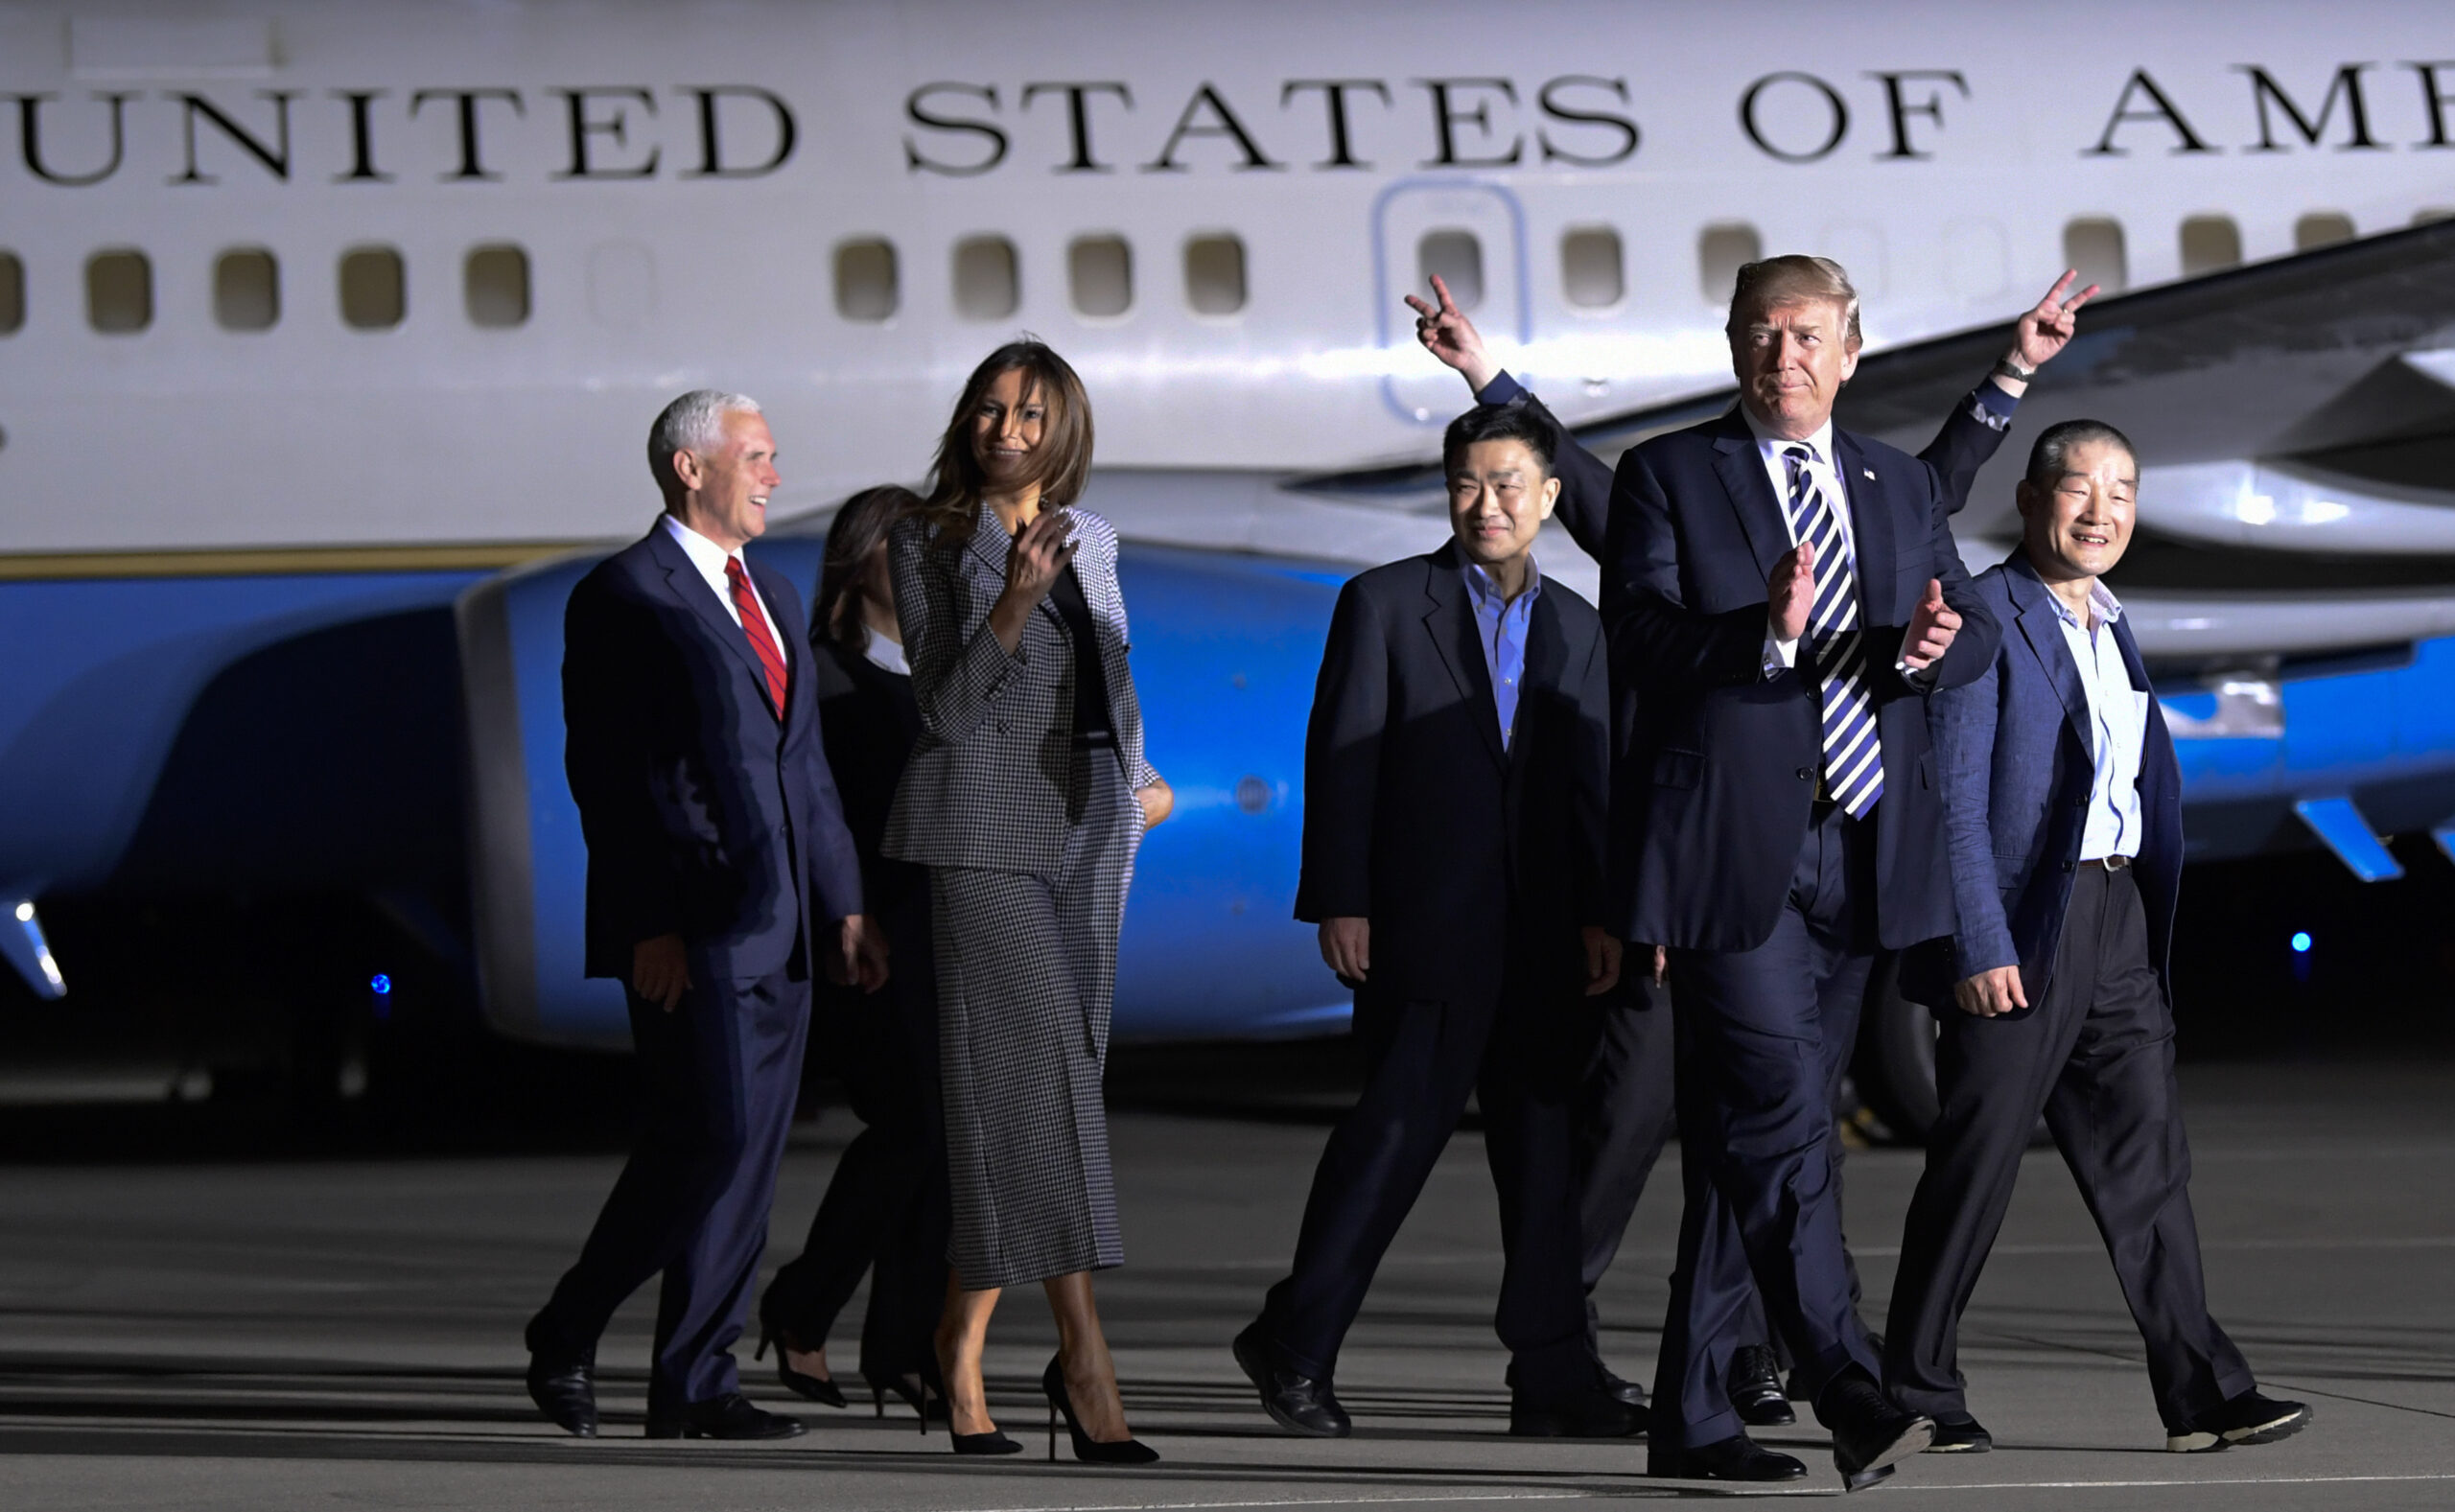 President Donald Trump walks with Tony Kim, third right, Kim Dong Chul, right, and Kim Hak Song, behind Trump, the three Americans detained in North Korea for more than a year